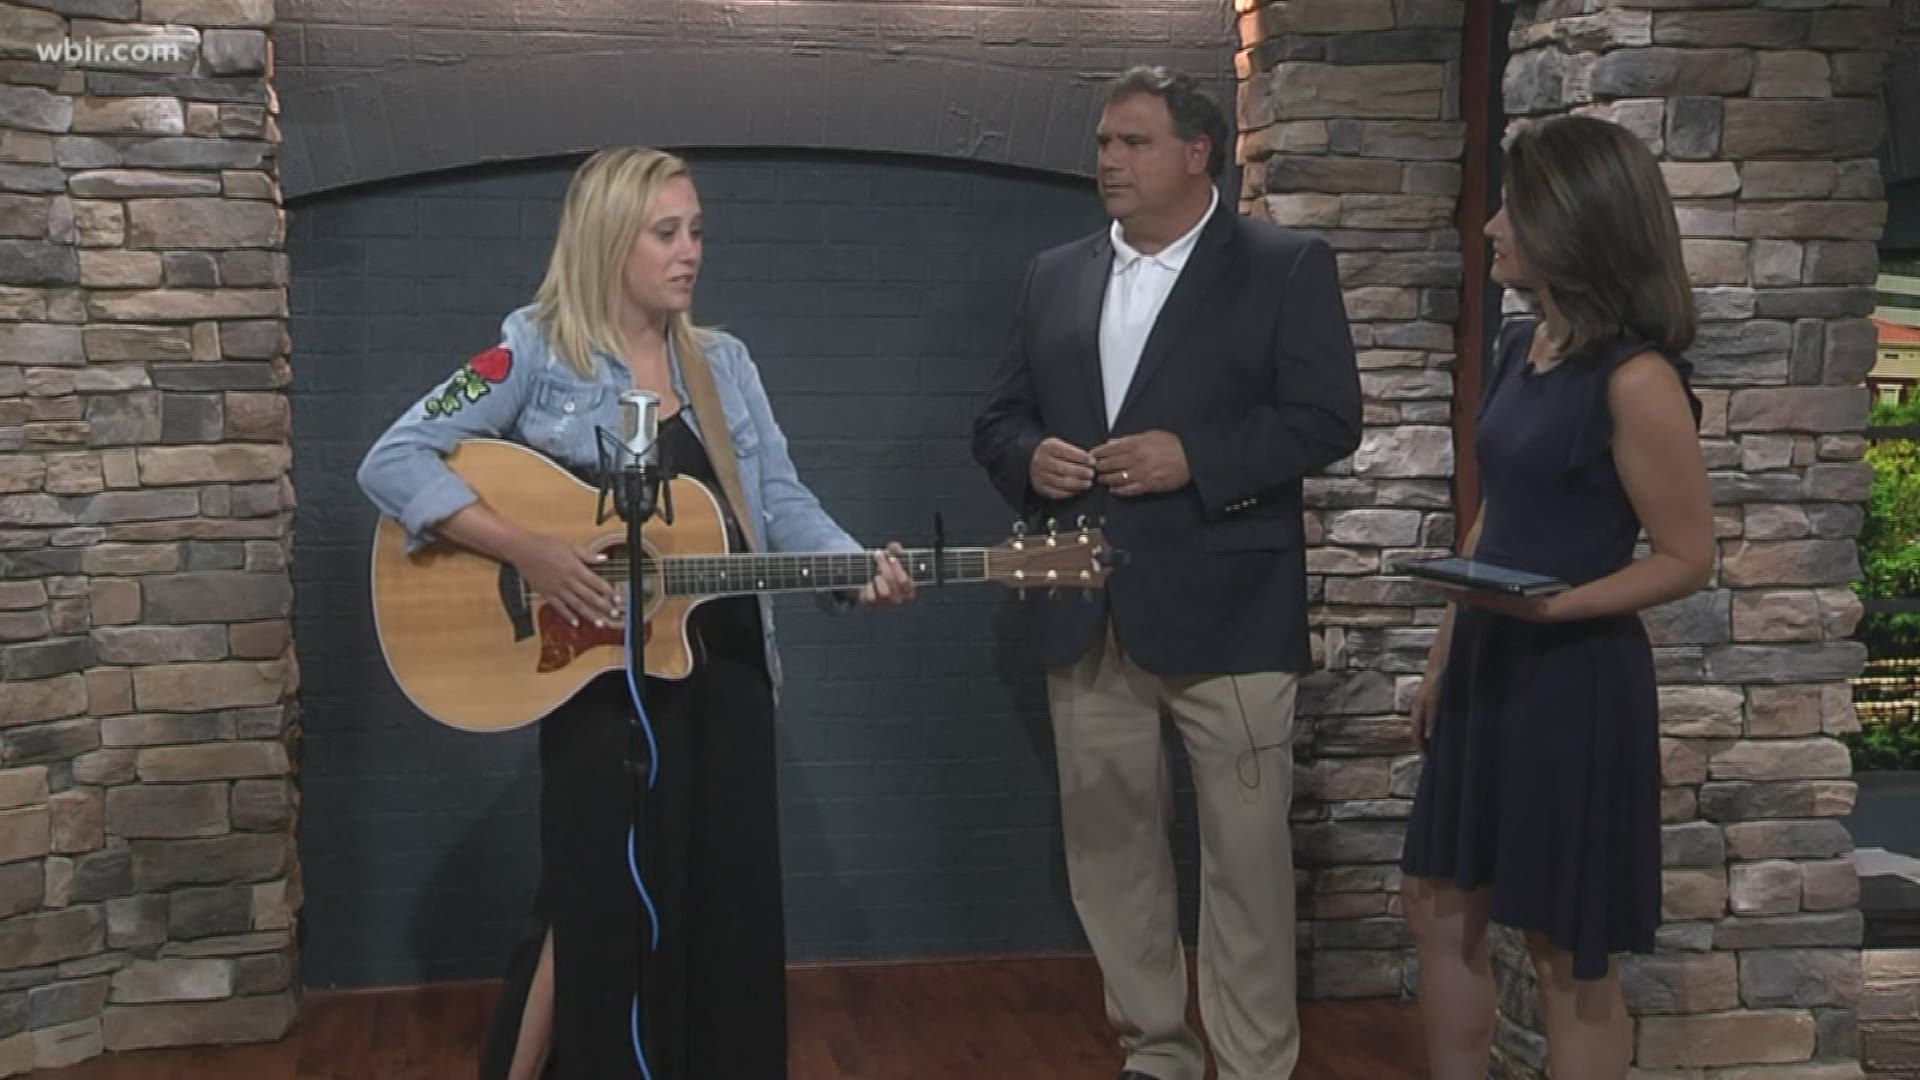 Country singer Dakota Danielle talks with Russell and Beth about her song "One Day Closer to You"  which she wrote after the deaths of her parents. You can follow Dakota on all social media platforms and visit  dakotadanielle.com to learn more. Aug. 12, 2019-4pm.